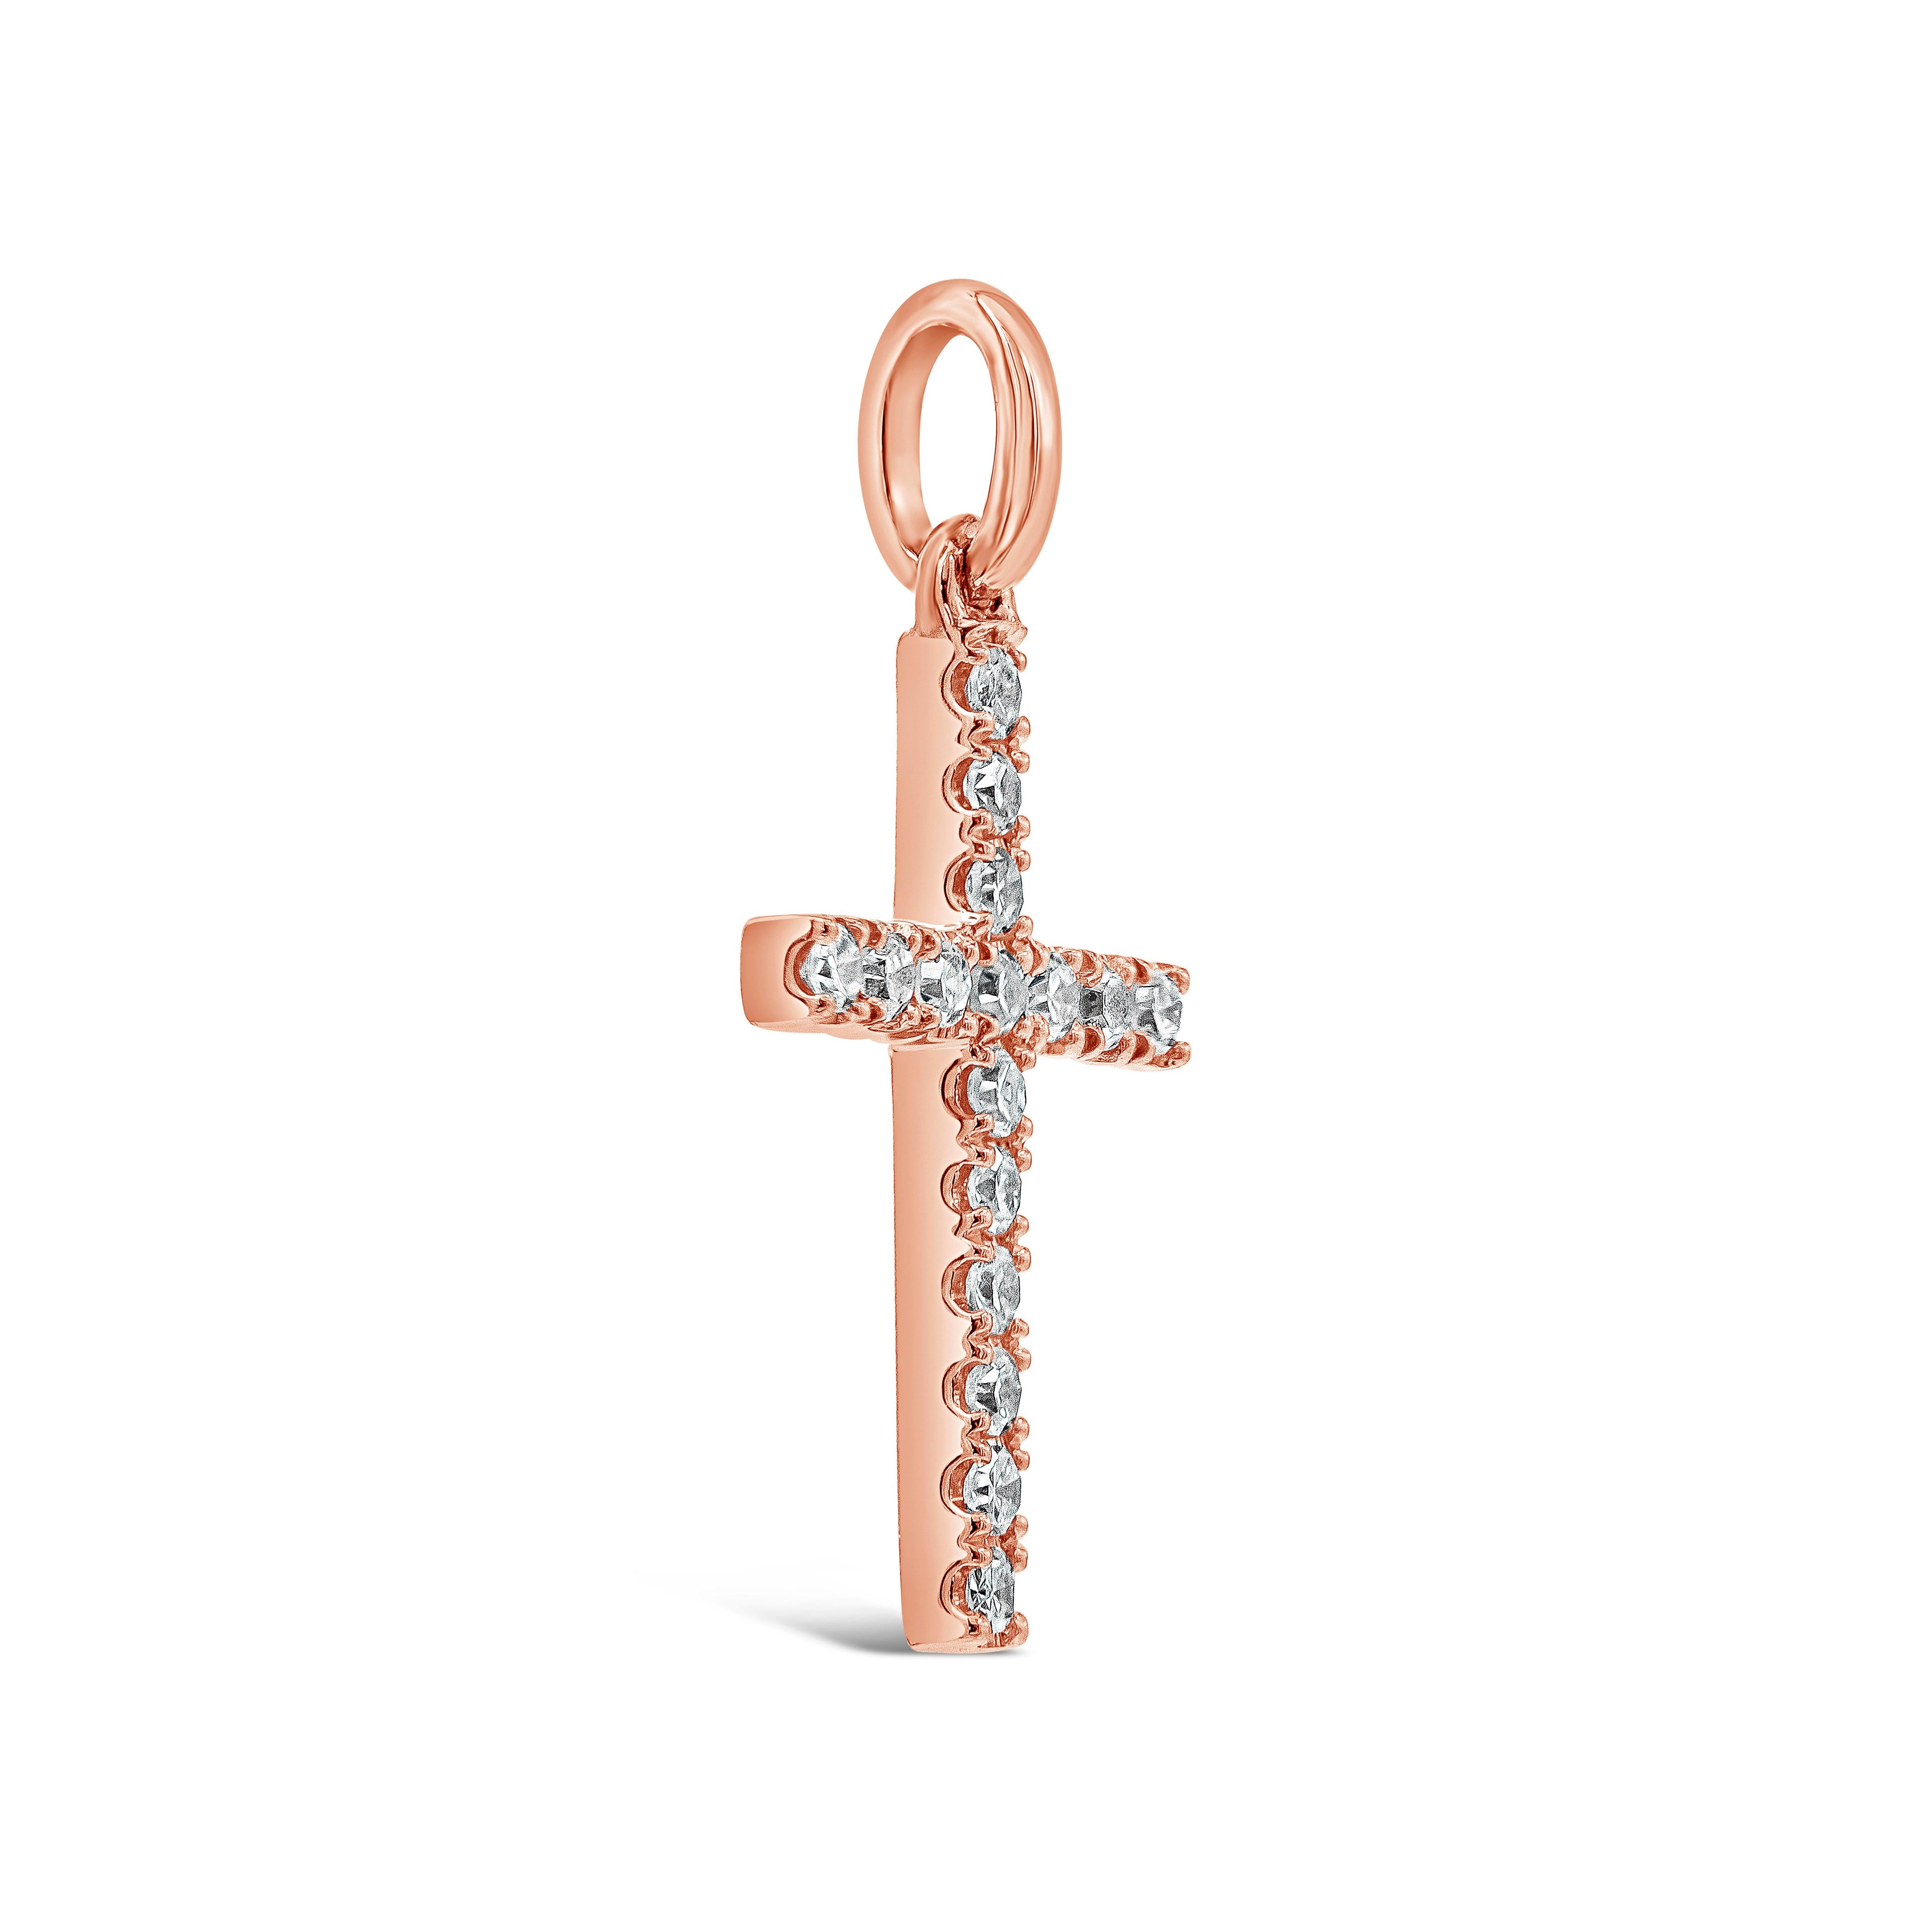 A small pendant necklace showcasing 0.08 carats total of single cut diamonds, set in a religious cross design. Made in 18k rose gold. Suspended in an 16 inch rose gold chain.

Style available in different price ranges. Prices are based on your